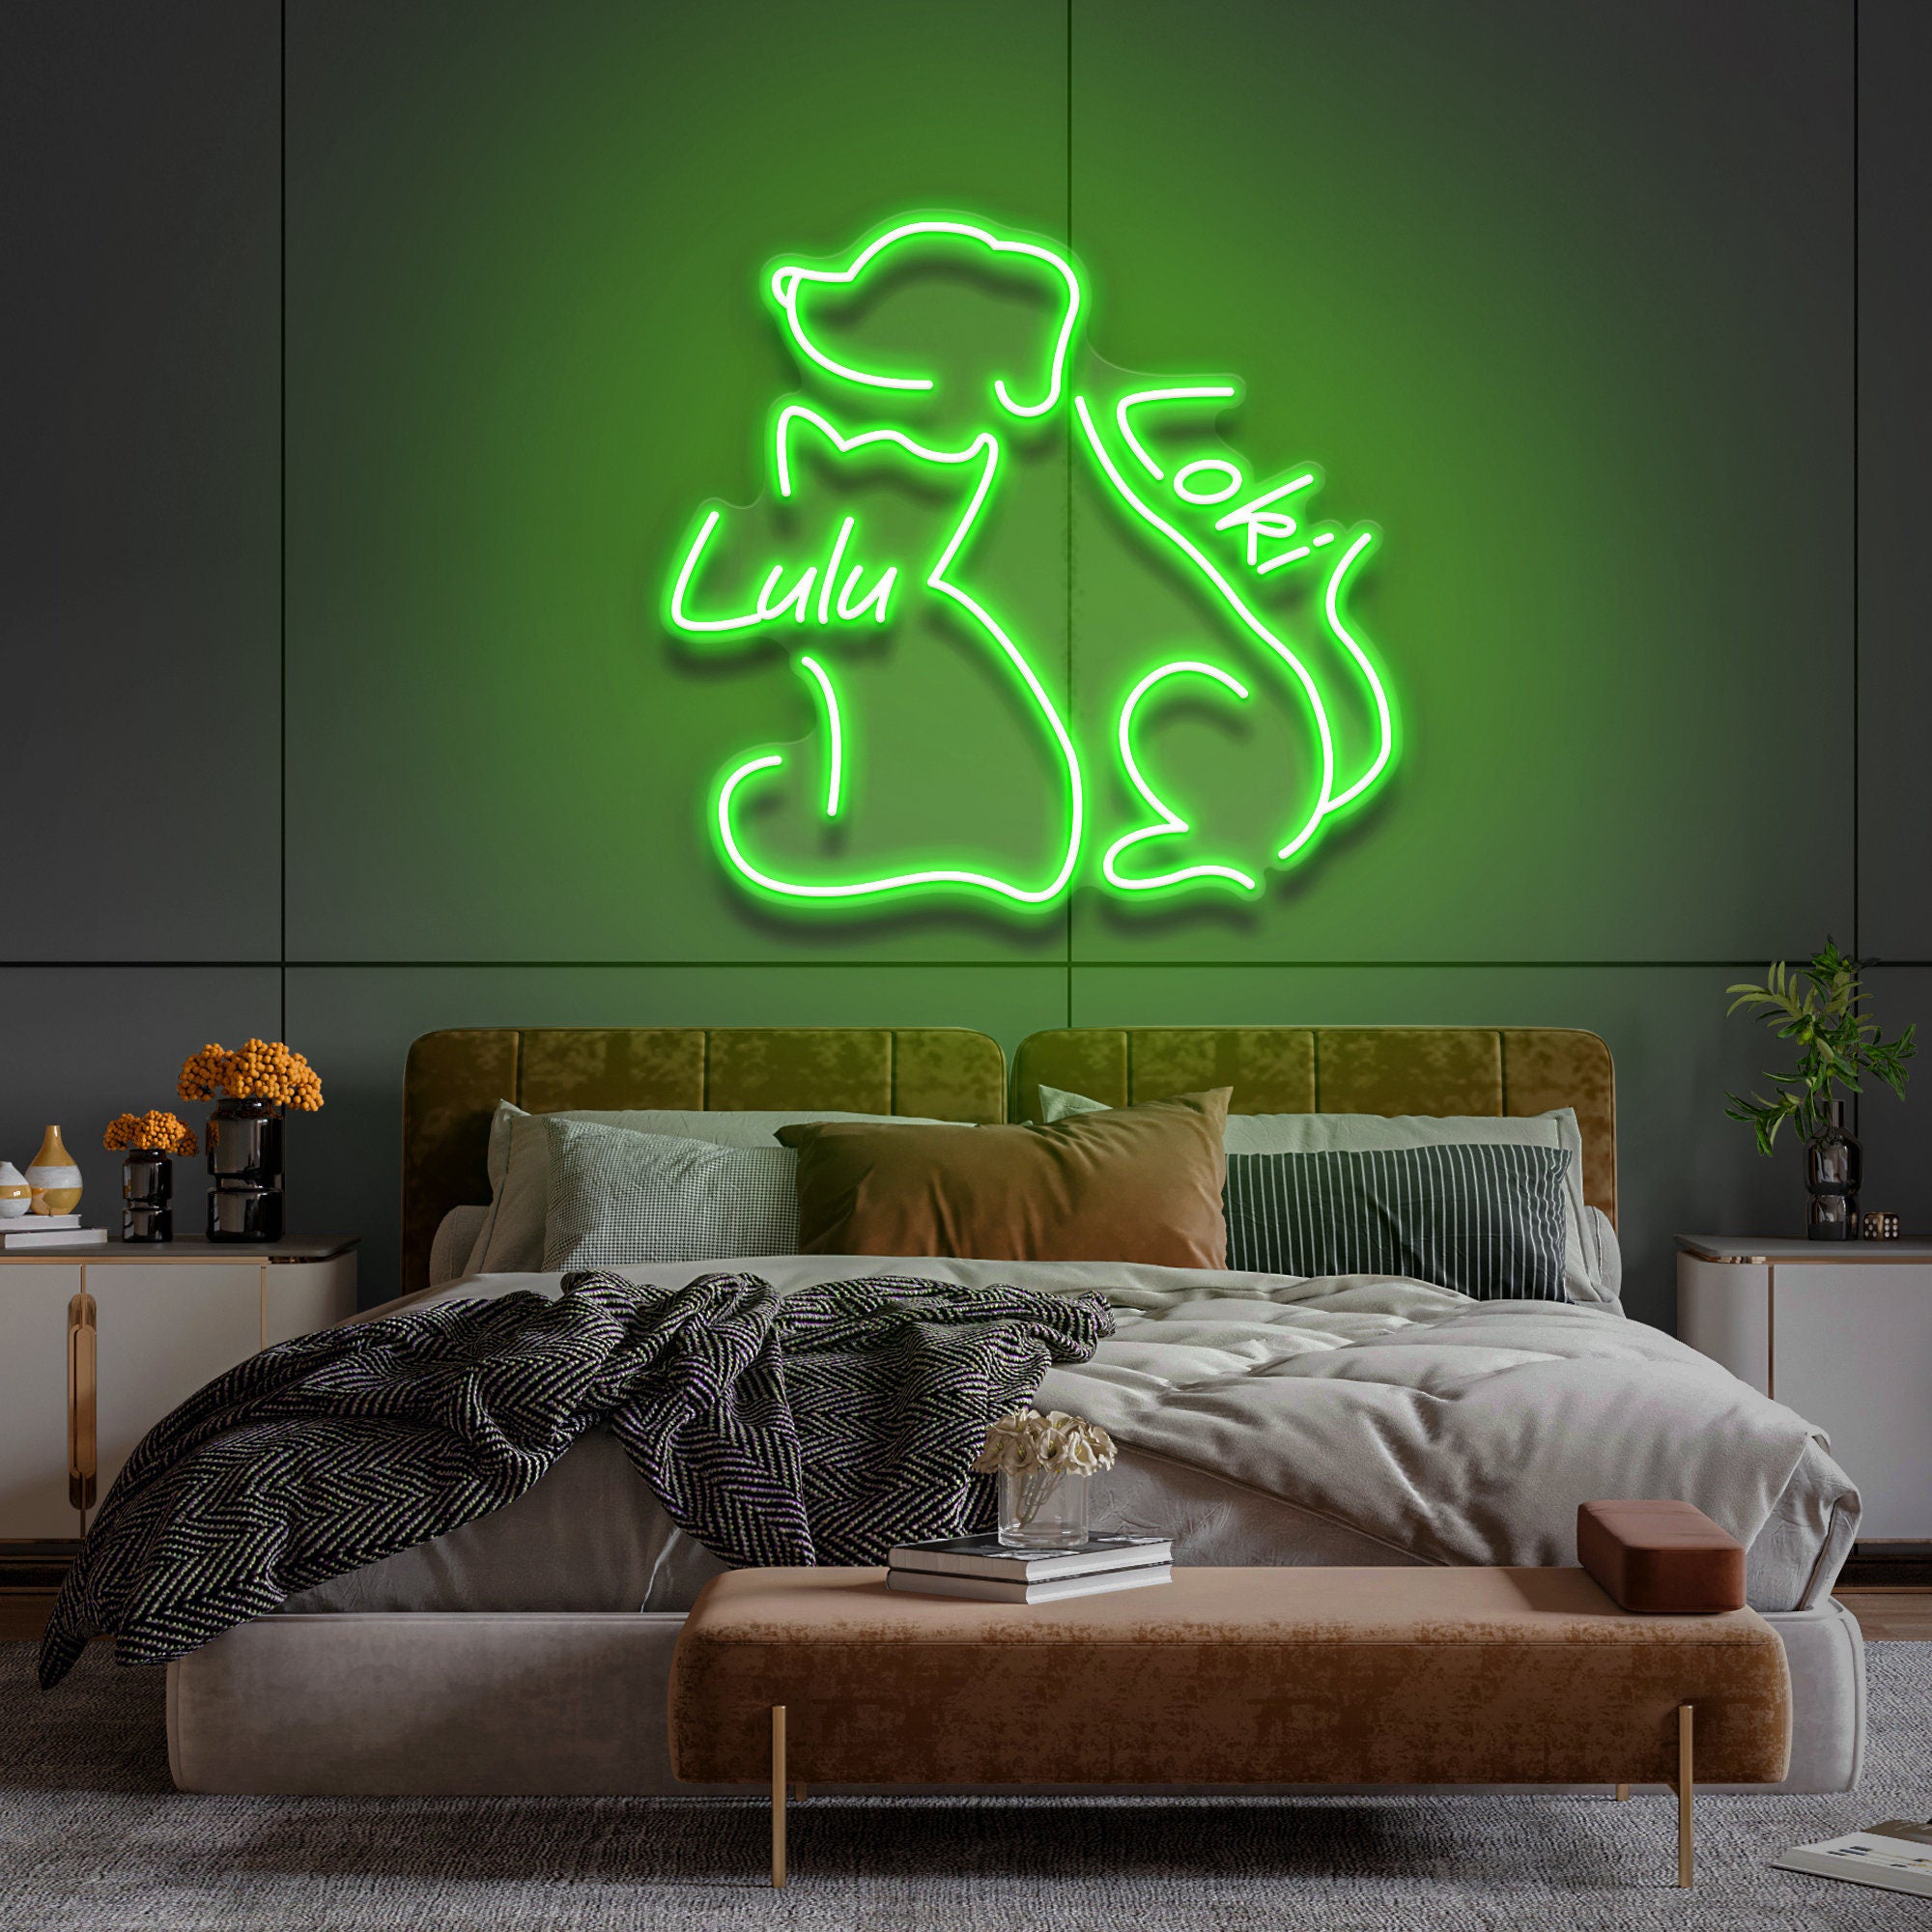 NEONIP - Personalized 100% Handmade Pet LED Neon Sign with Your Pet's Name